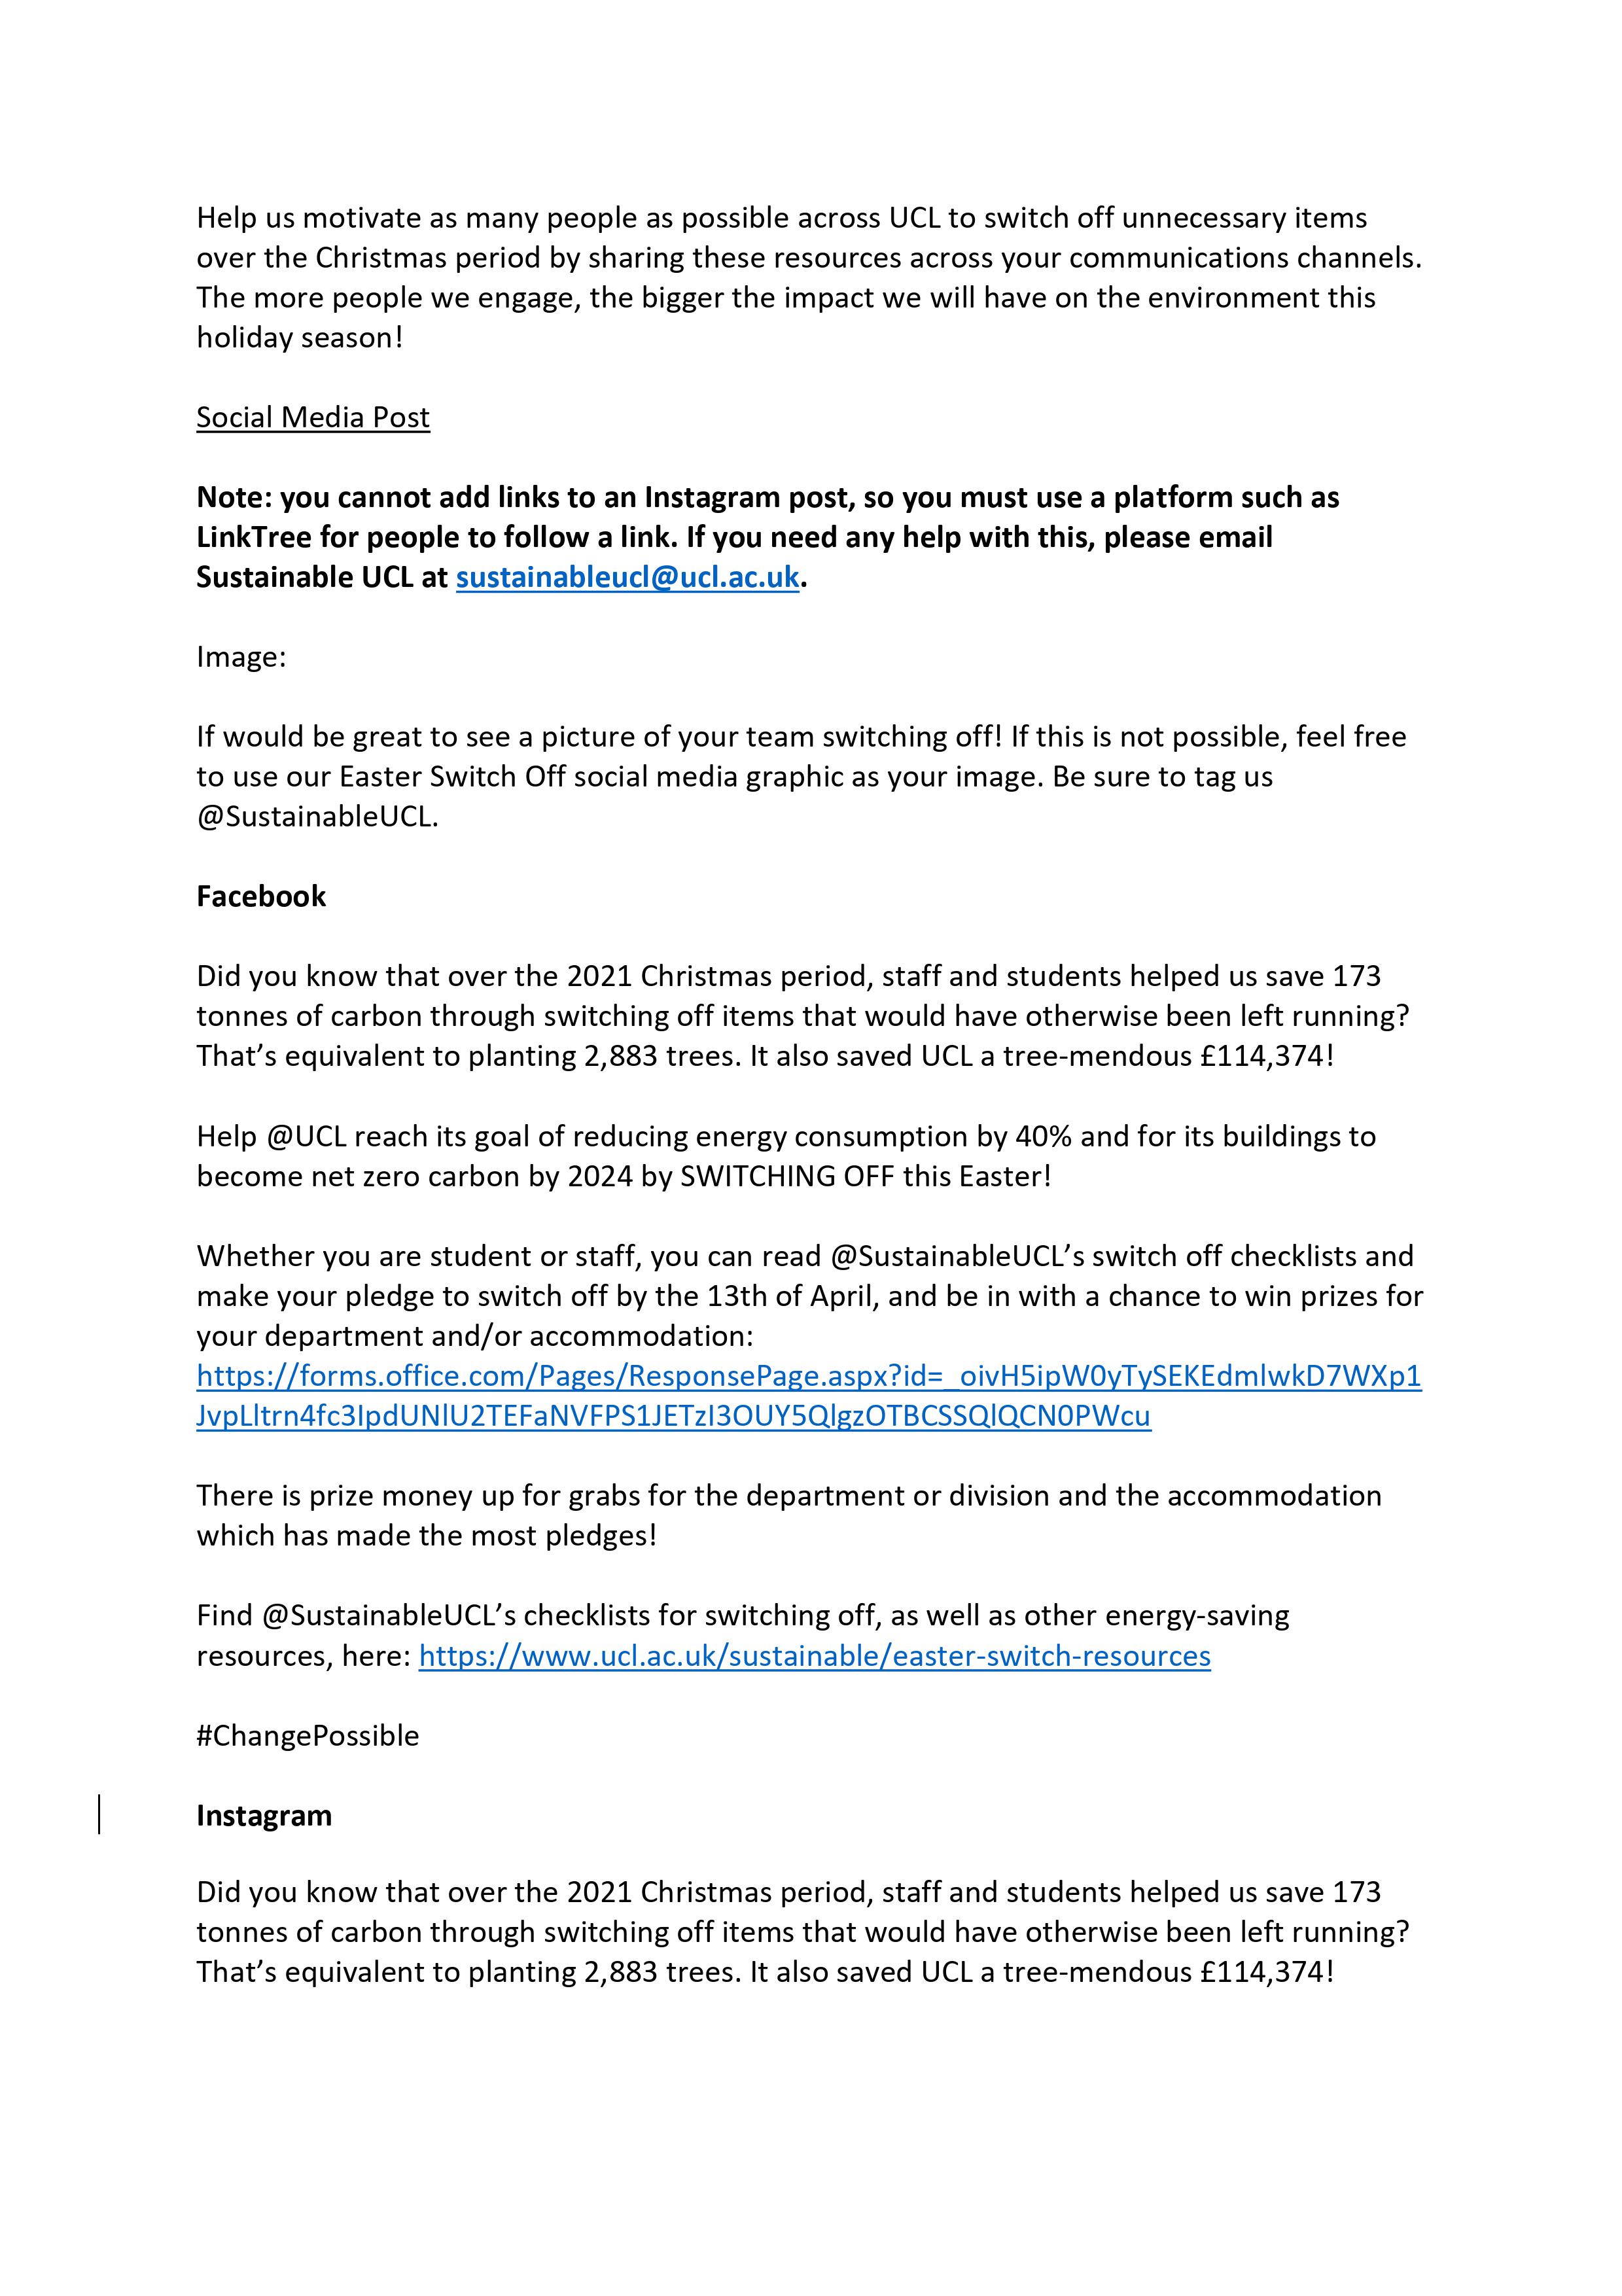 Screenshot of the social media and email copy document